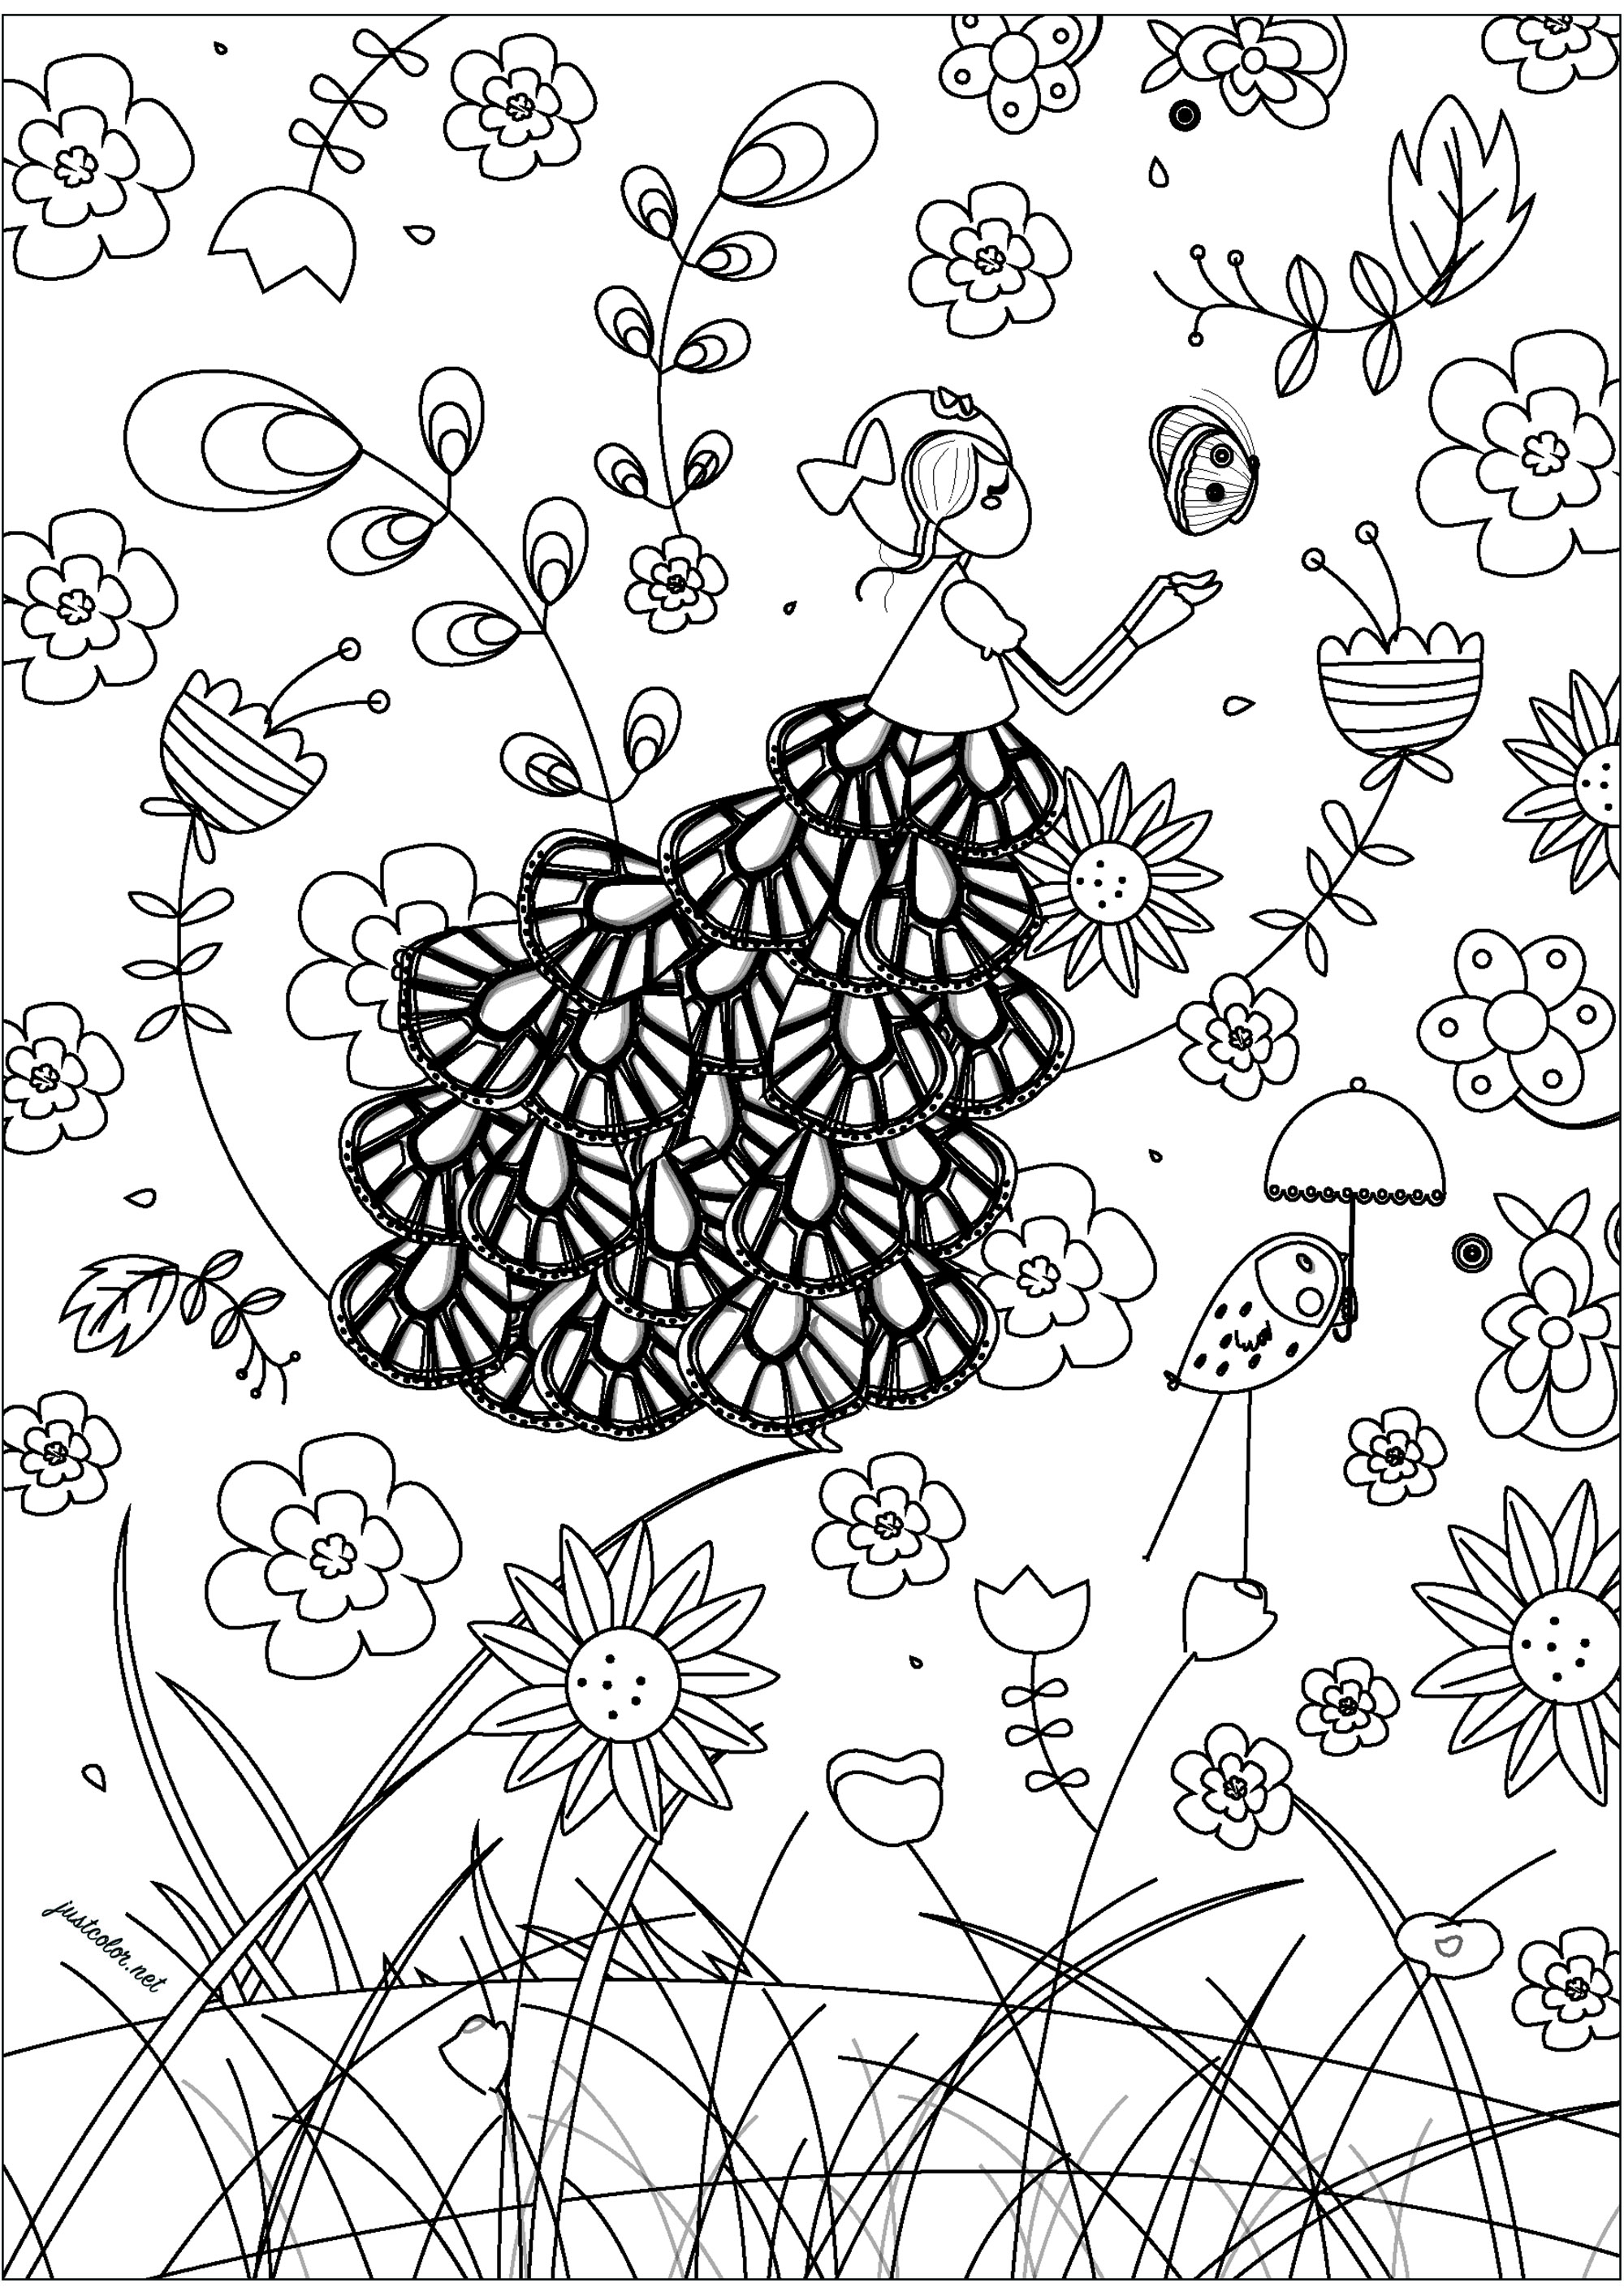 Fairy floating in the middle of field flowers. This coloring page is an invitation to daydream and relax. An elegant fairy floats amidst a variety of beautiful flowers, creating an enchanting landscape, Artist : Gaelle Picard